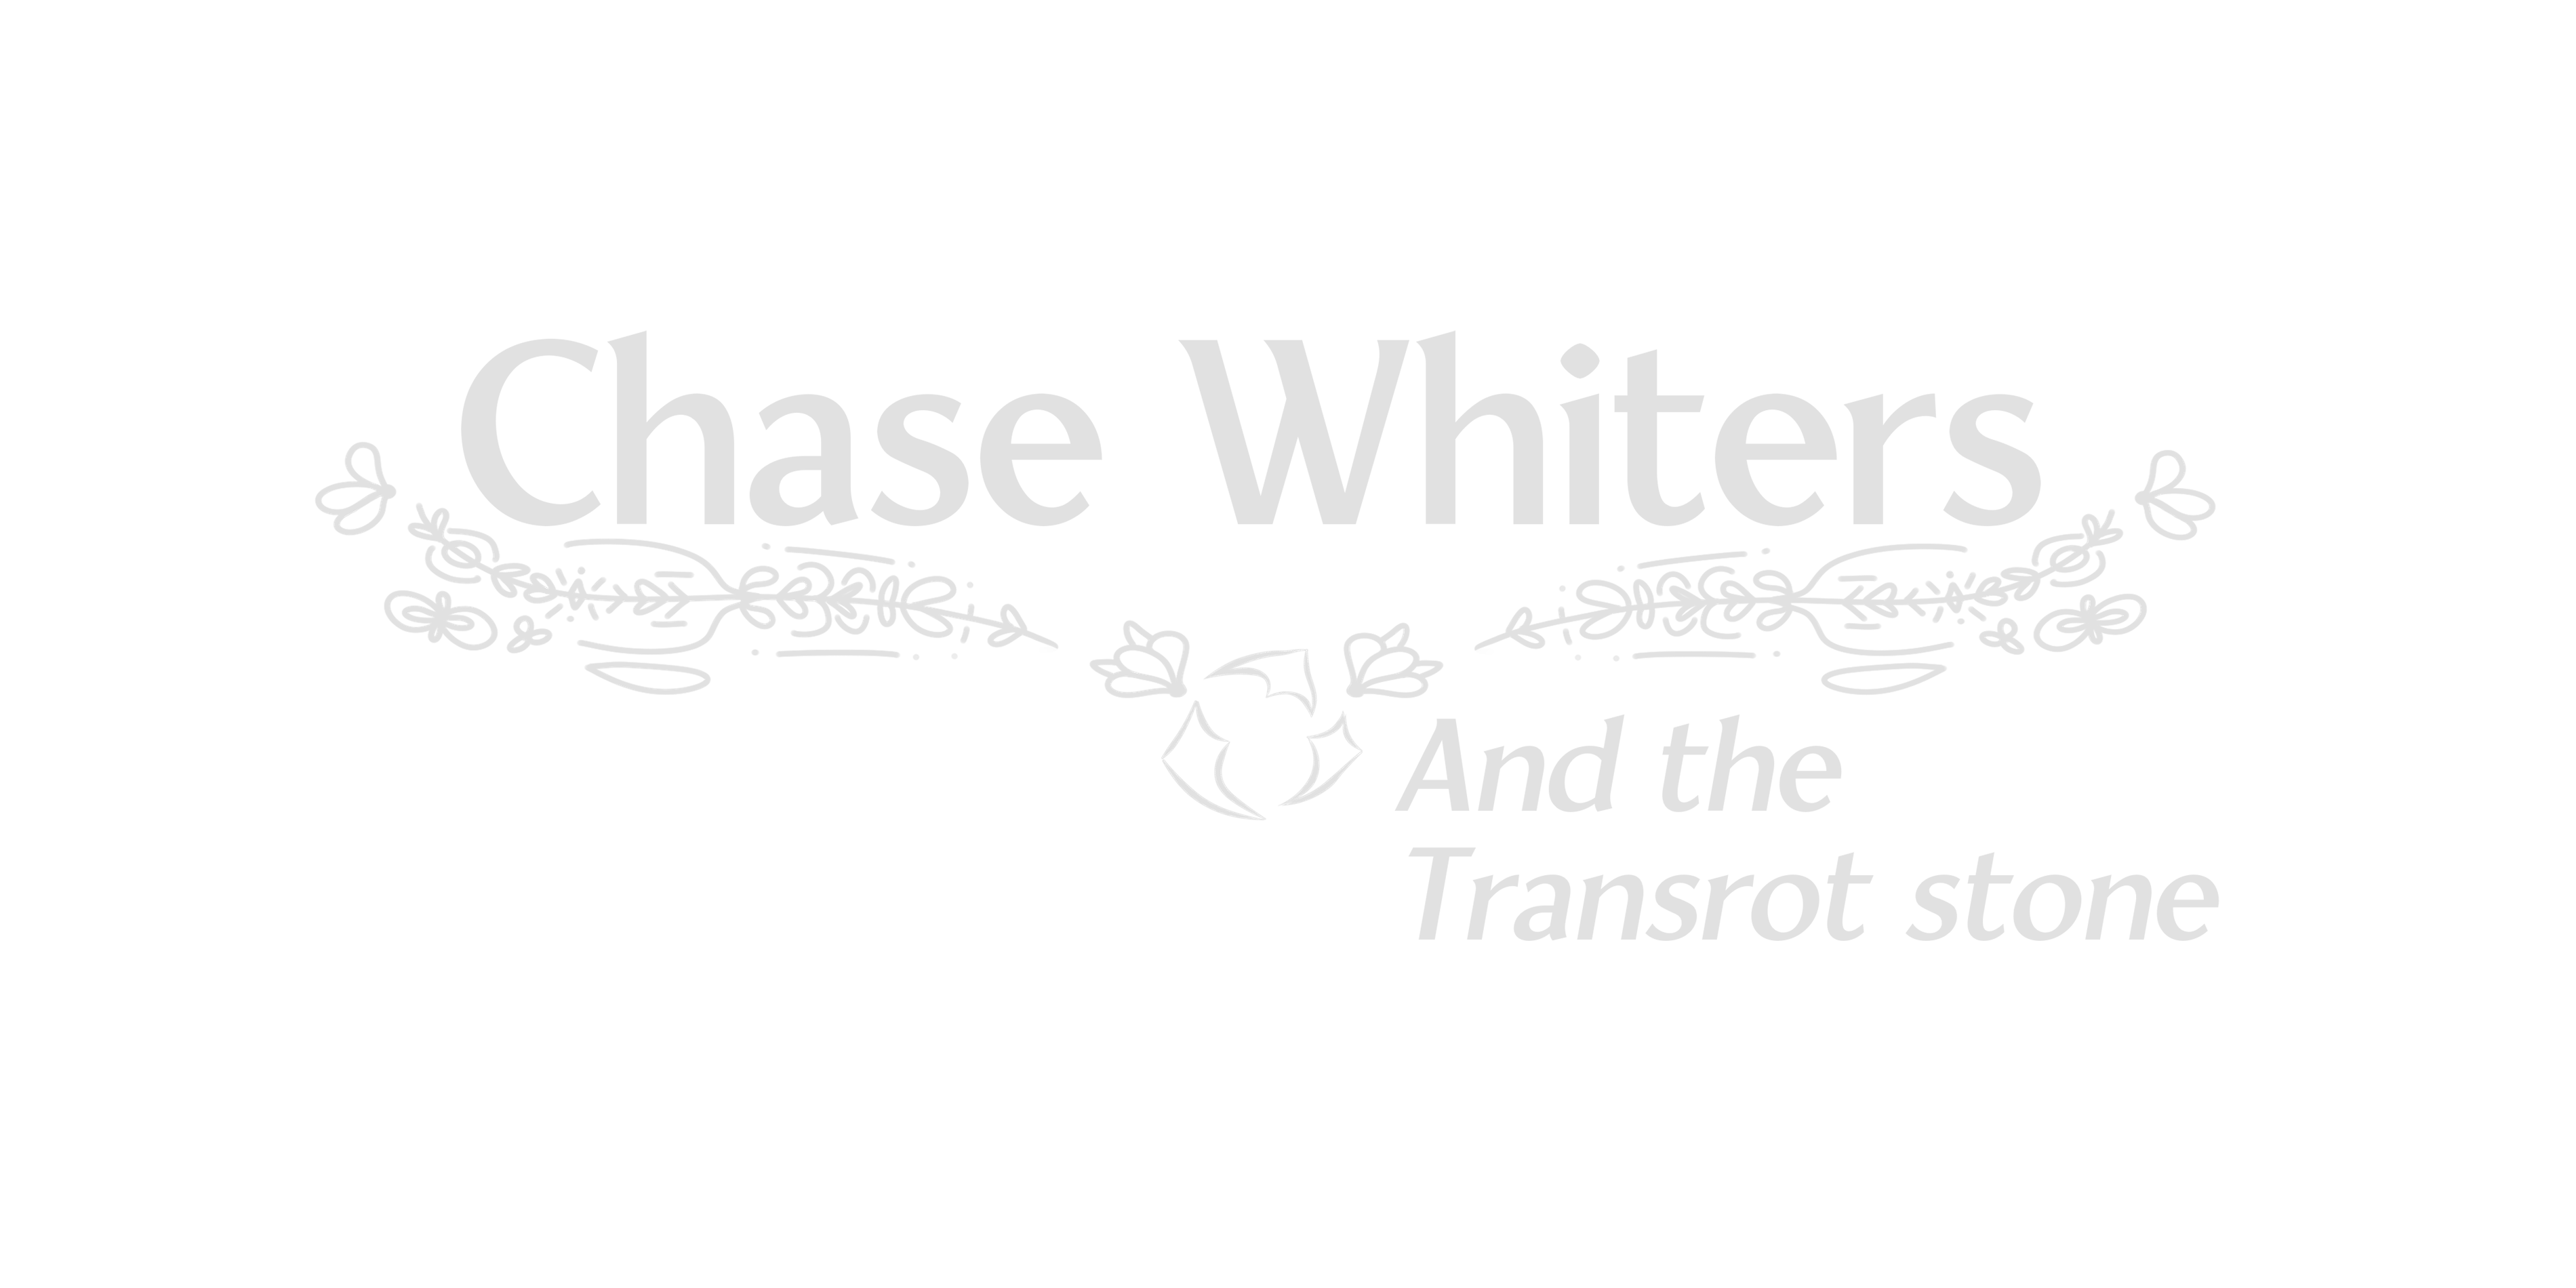 Chase Withers: And the Transrot Stone - V0.0.1